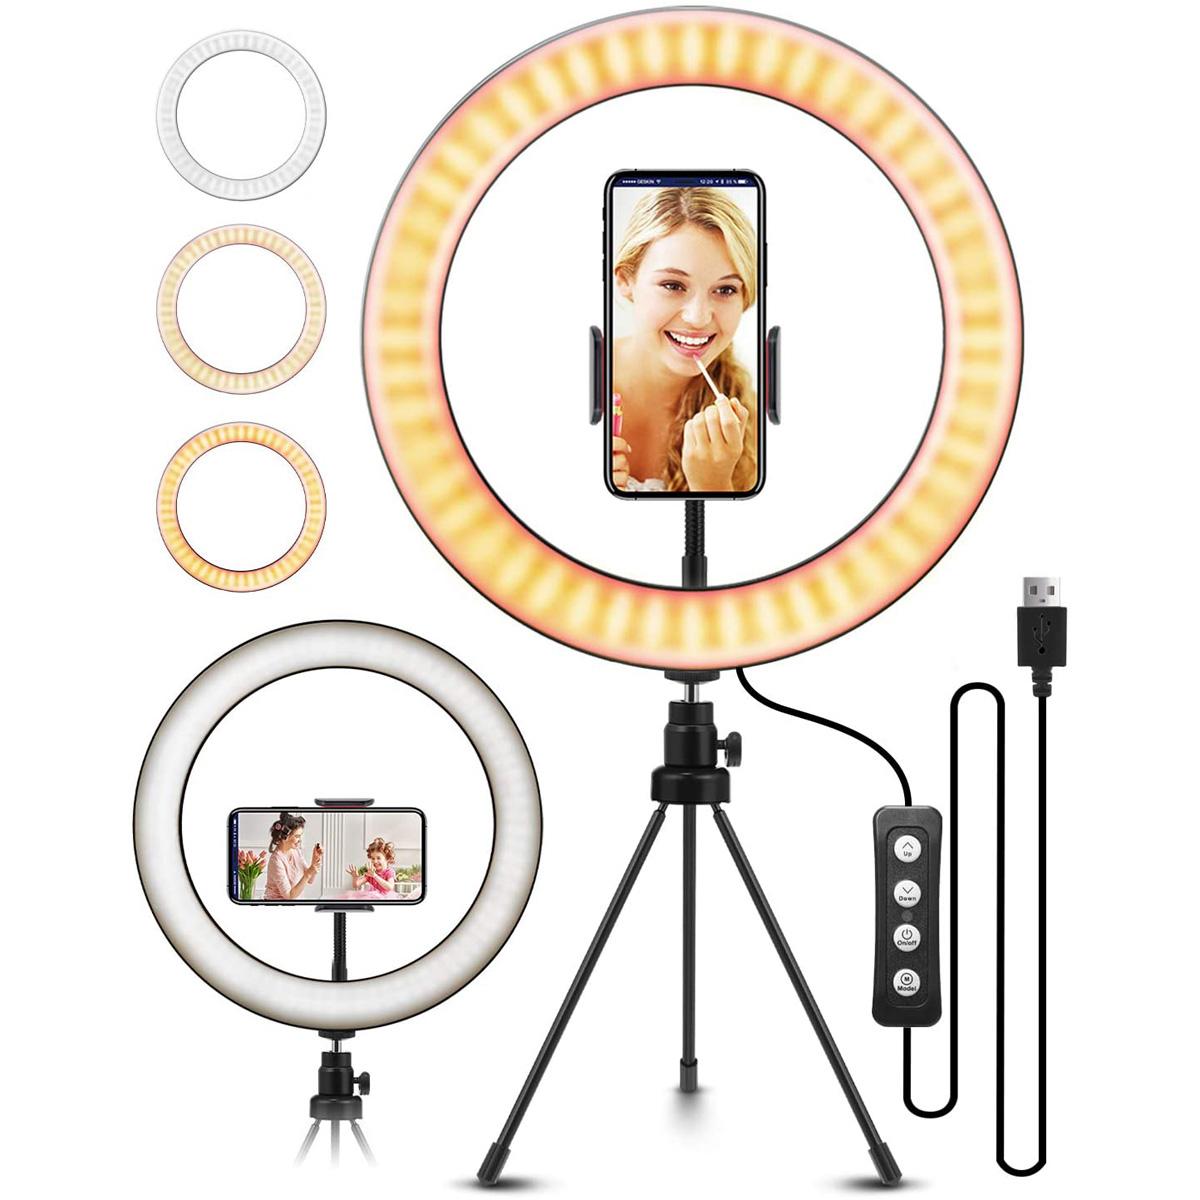 Elegiant 10.2in Selfie Ring Light with Tripod Stand for $13.79